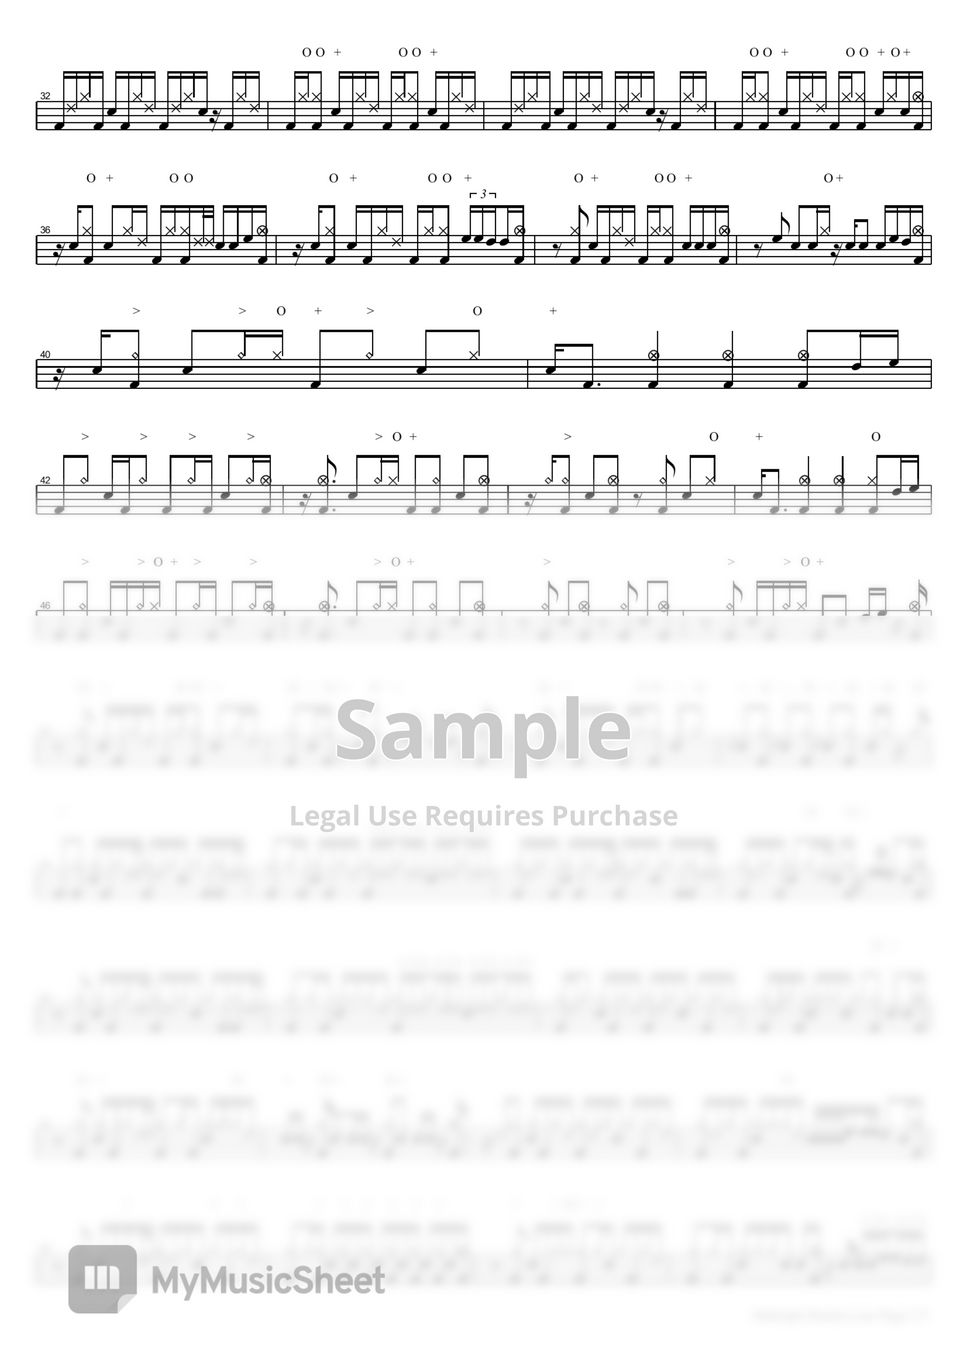 Rendezvous　Sheets　Casiopea　COPYDRUM　Midnight　by